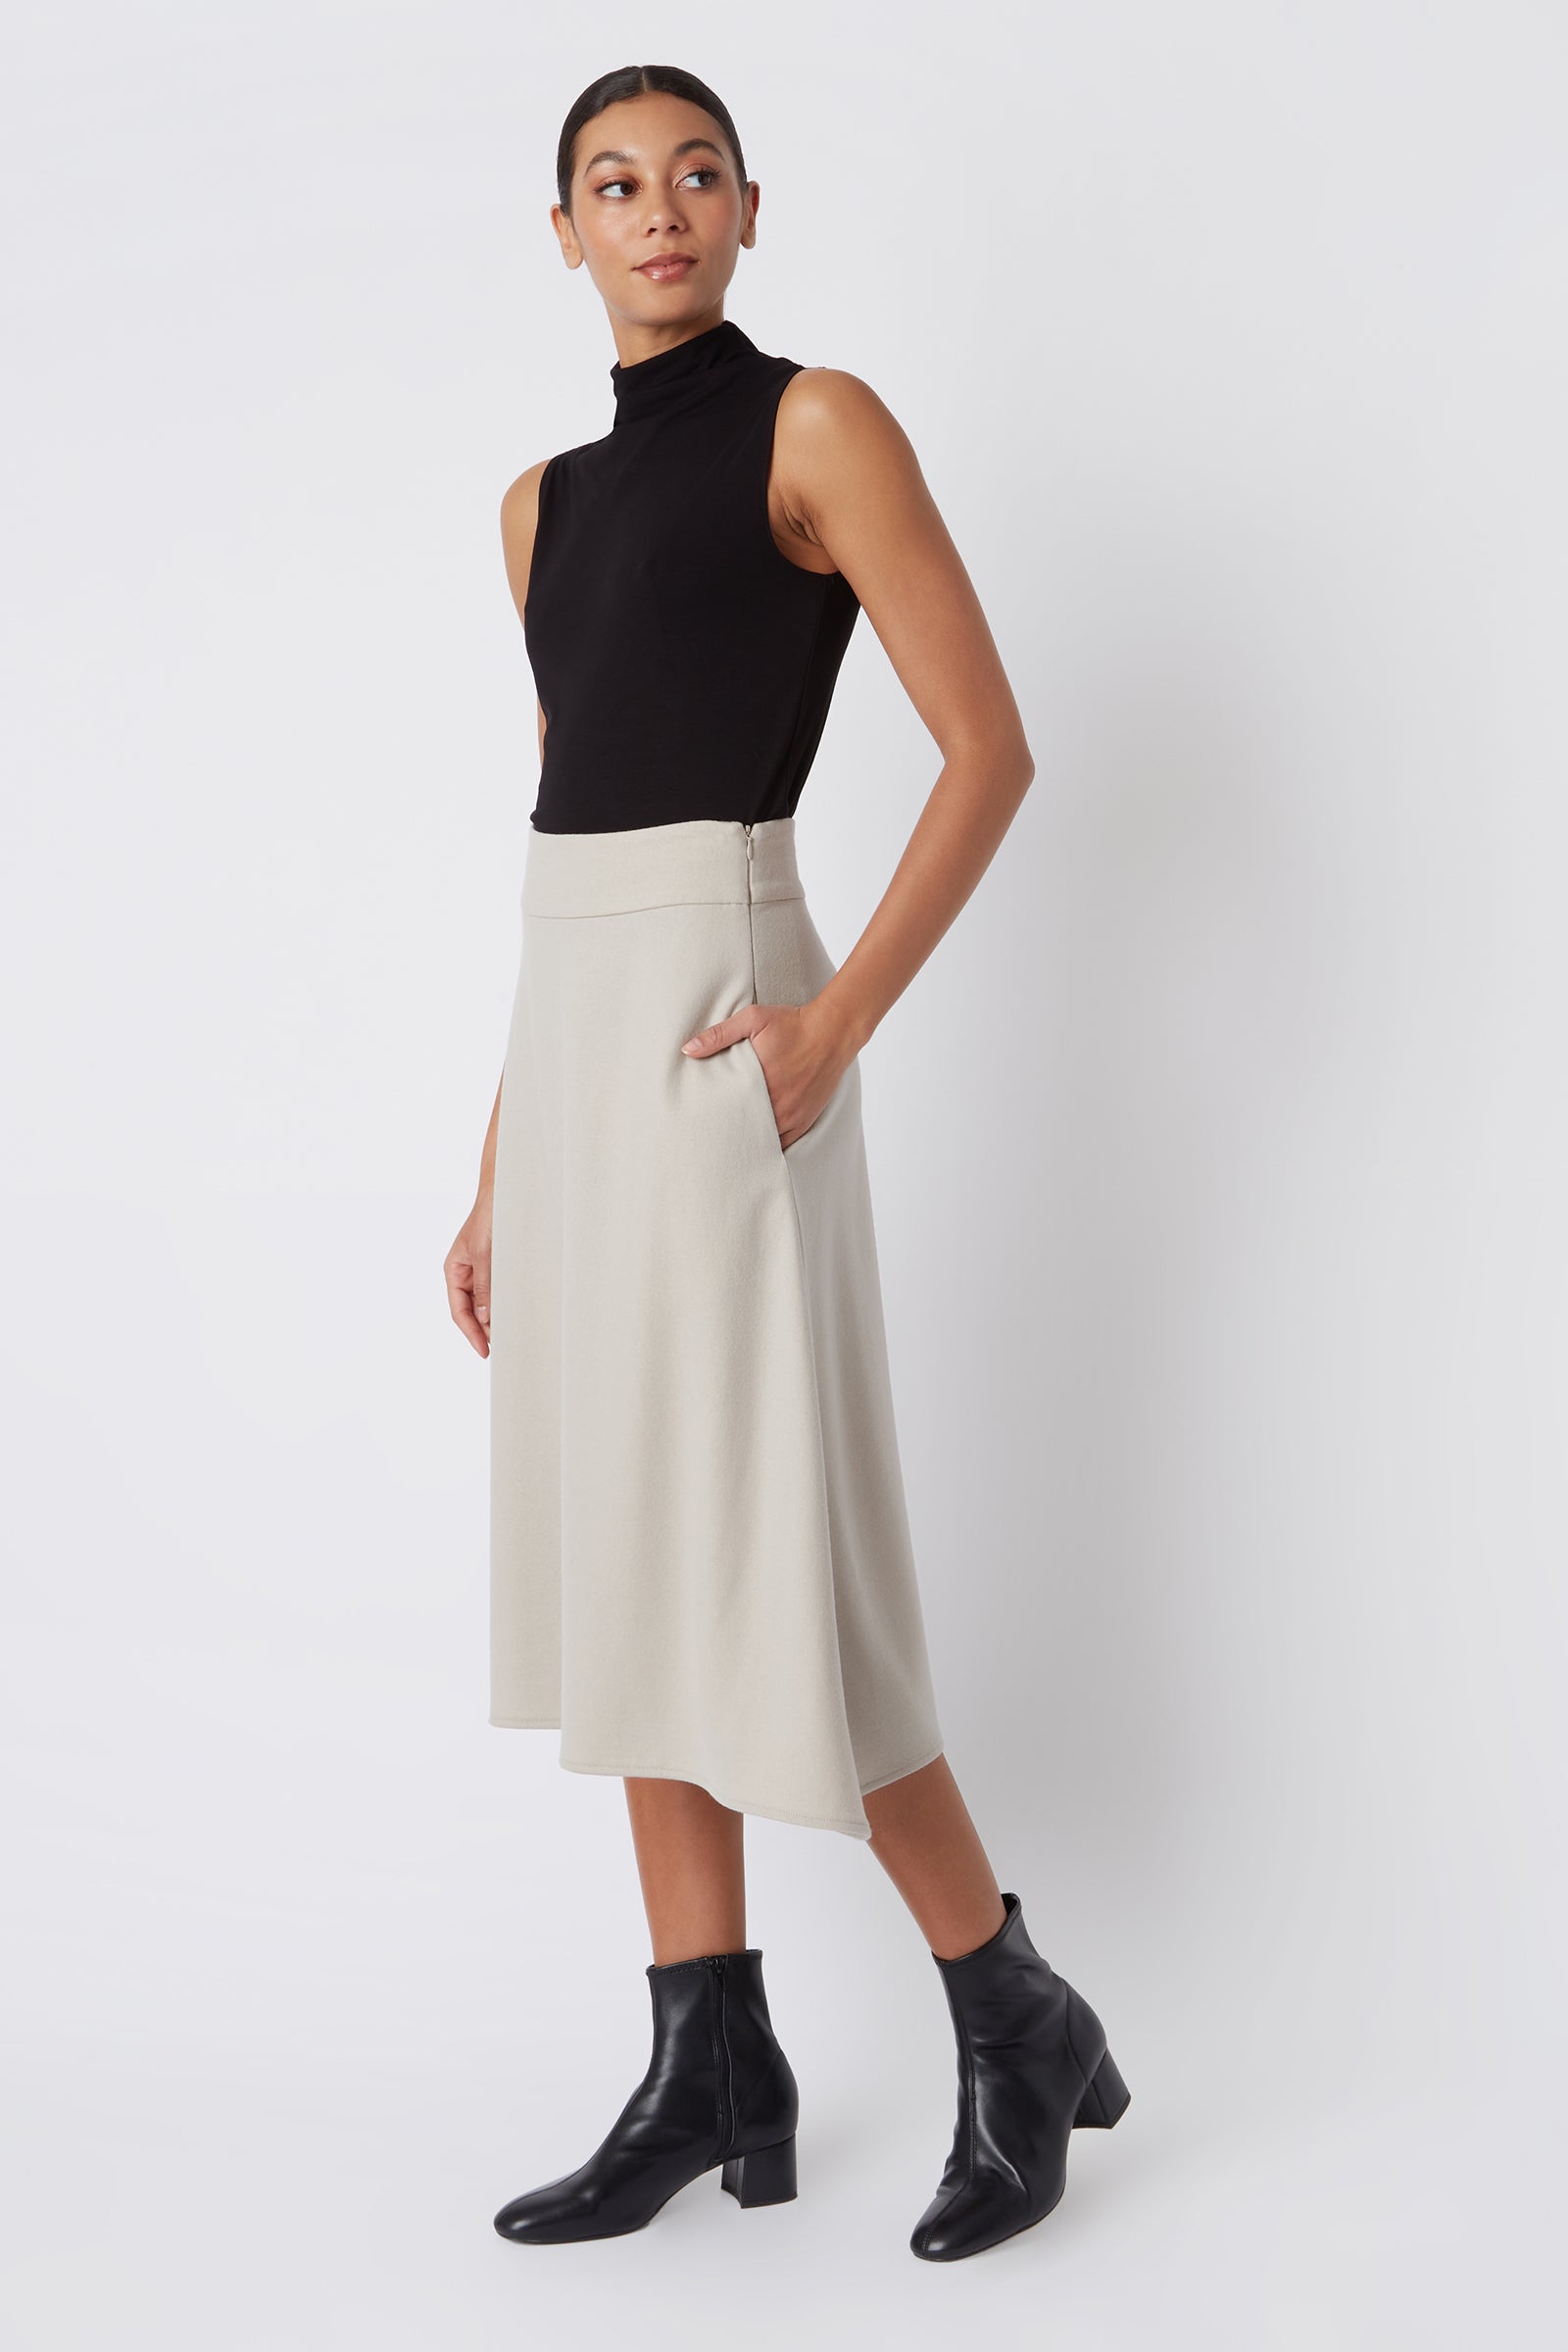 Kal Rieman Martina Felted Jersey Kick Skirt in Mink on Model with Hand in Pocket Full Side View